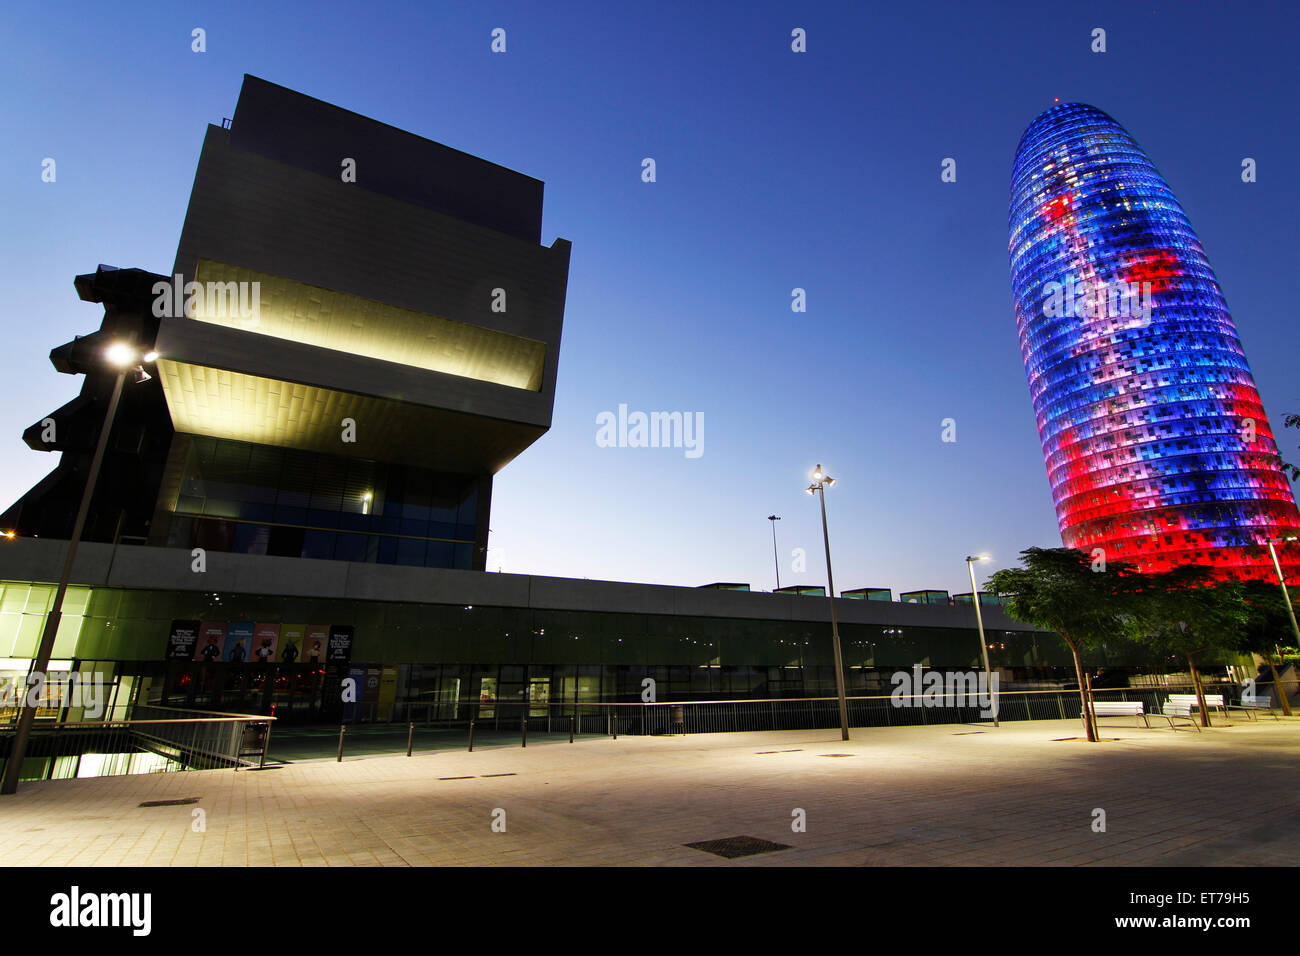 Building Design Hub Barcelona, by MBM architects. Agbar Tower, by Jean Nouvel. Barcelona. Stock Photo